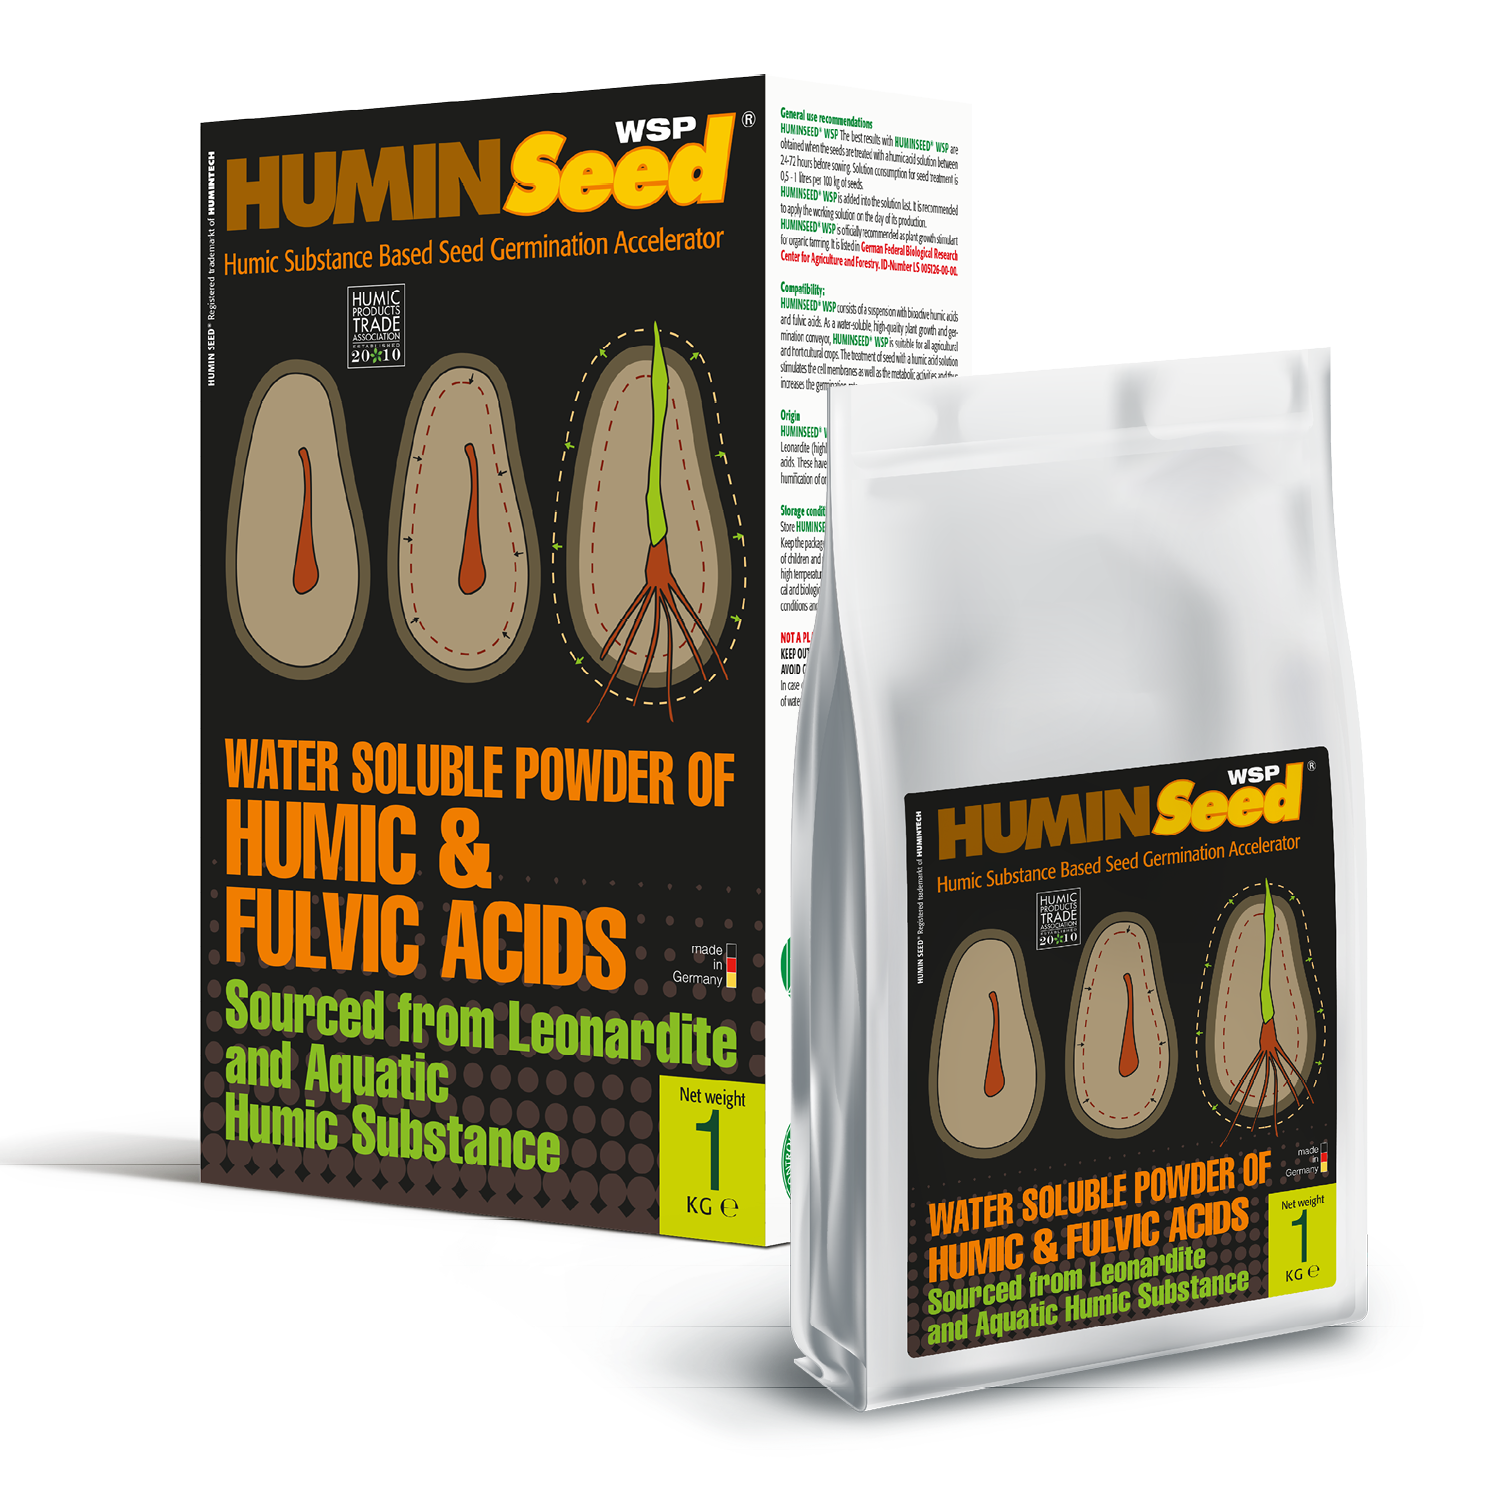 HUMINTECH HUMINSEED WSP is a Humic Based Seed Germination Accelerator